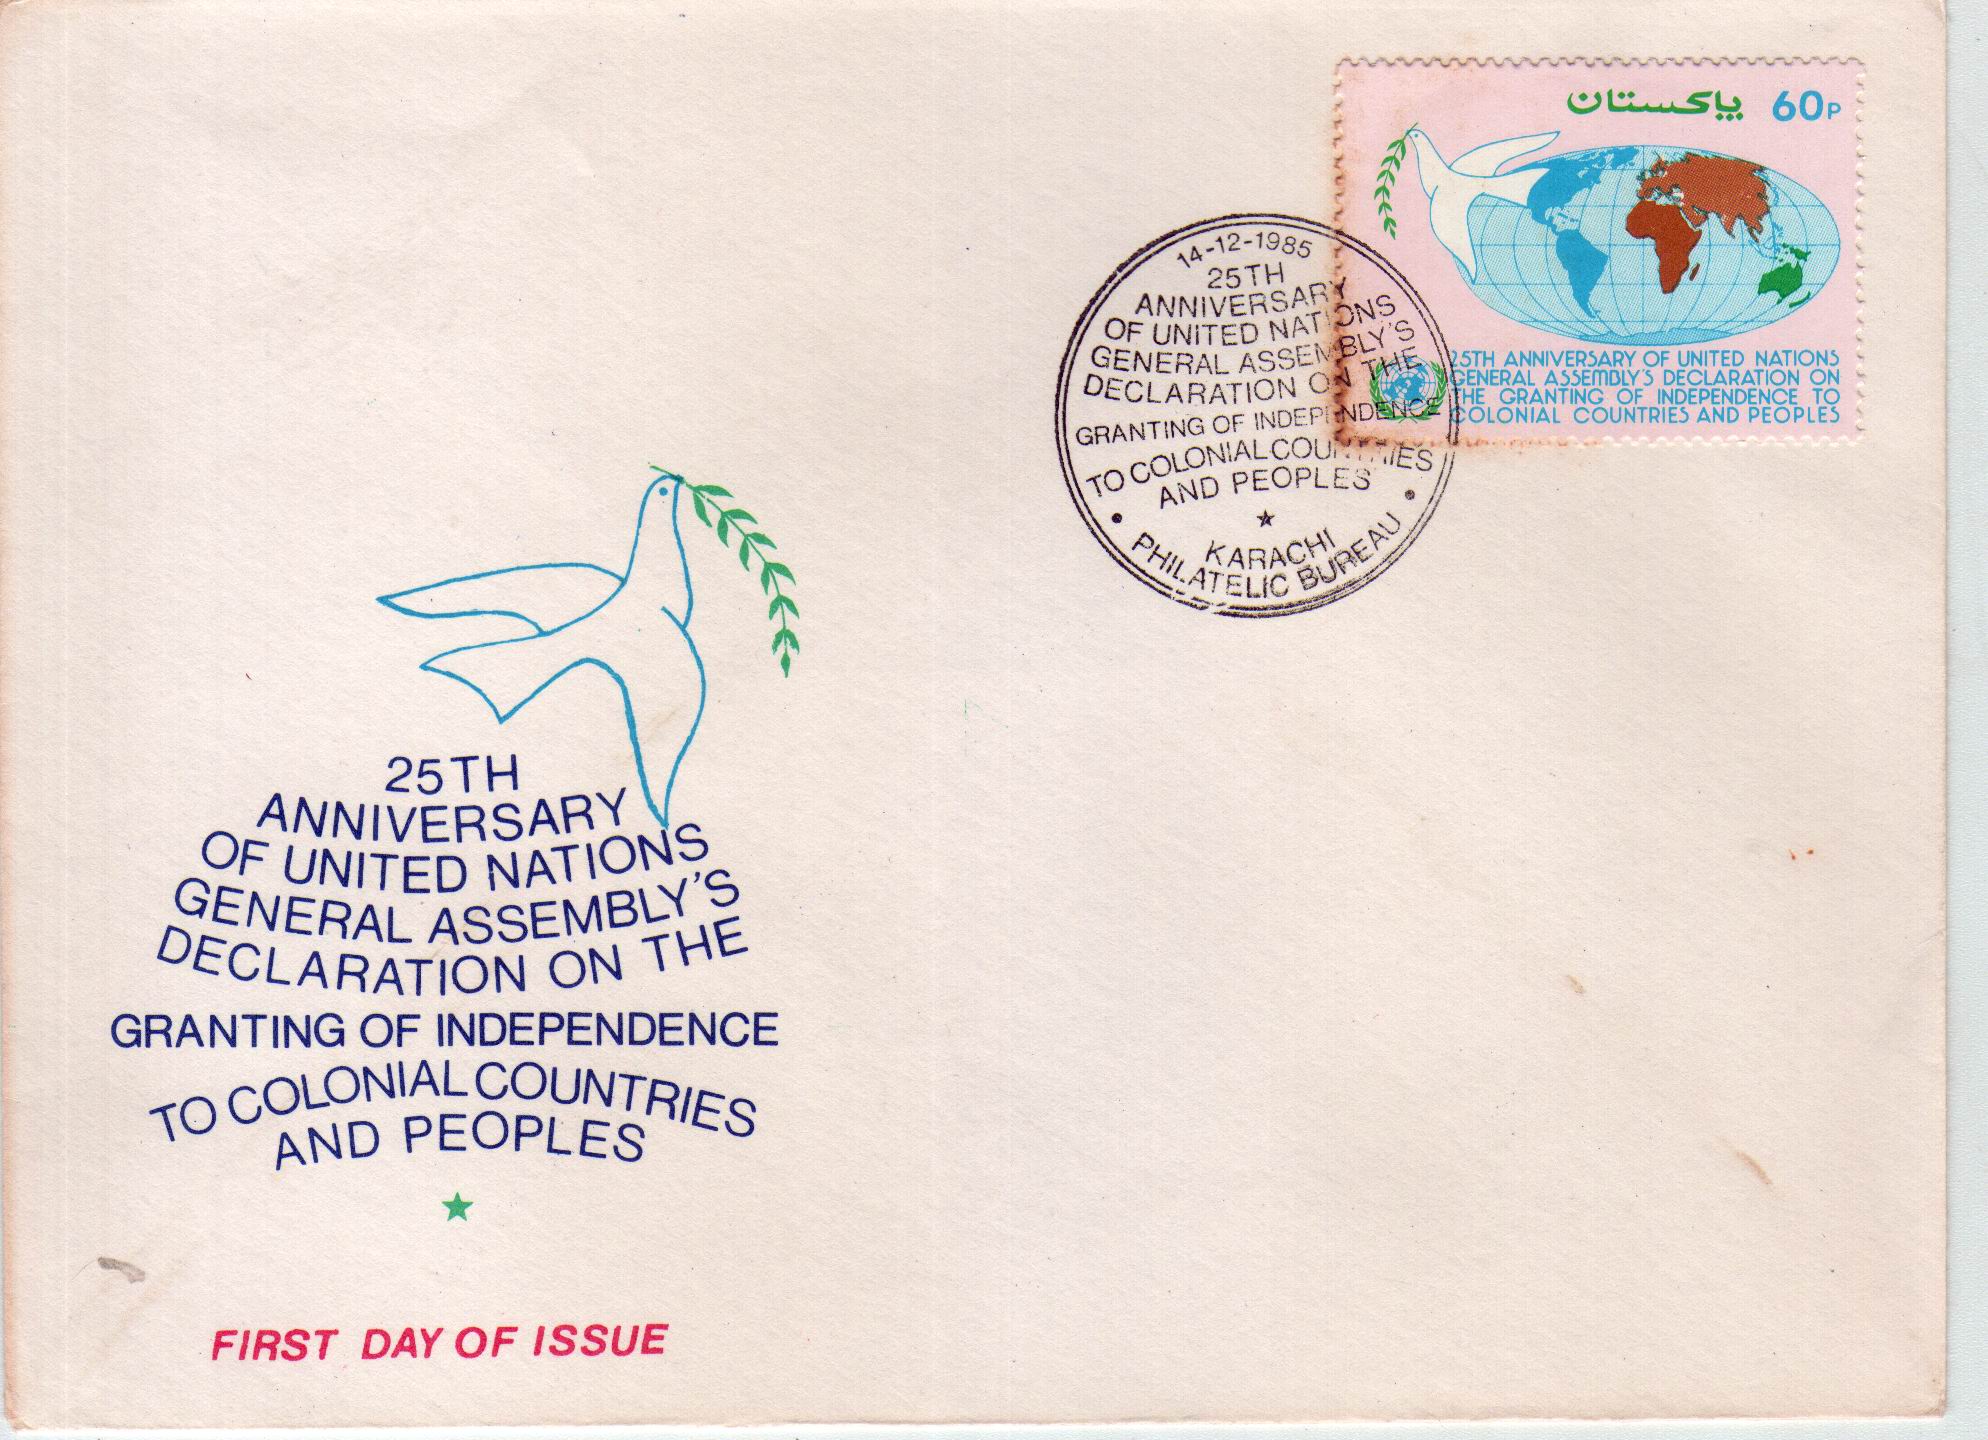 Pakistan Fdc 1985 Brochure & Stamp United Nations Genl Assembly - Click Image to Close